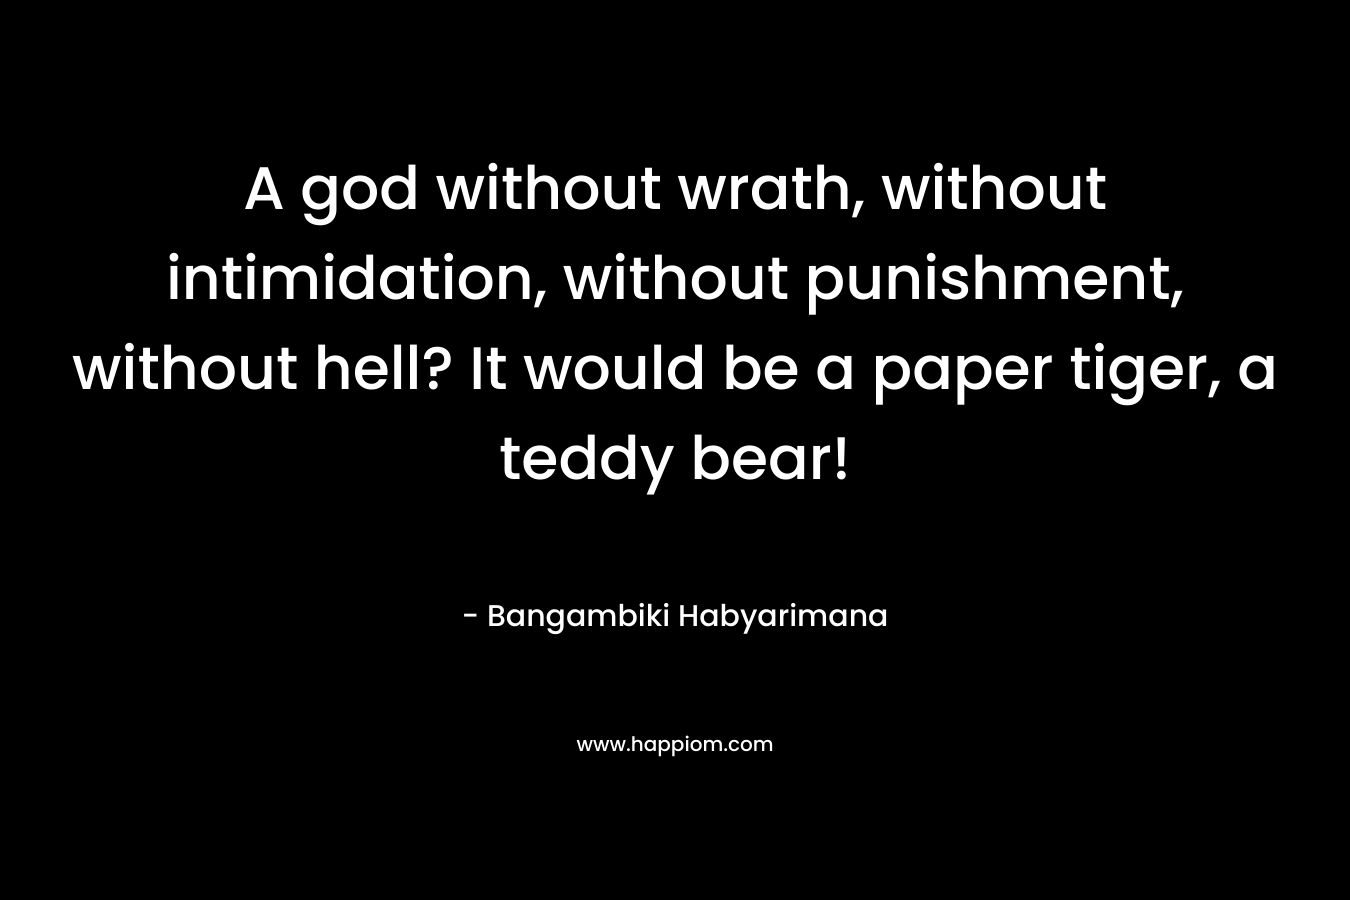 A god without wrath, without intimidation, without punishment, without hell? It would be a paper tiger, a teddy bear! – Bangambiki Habyarimana